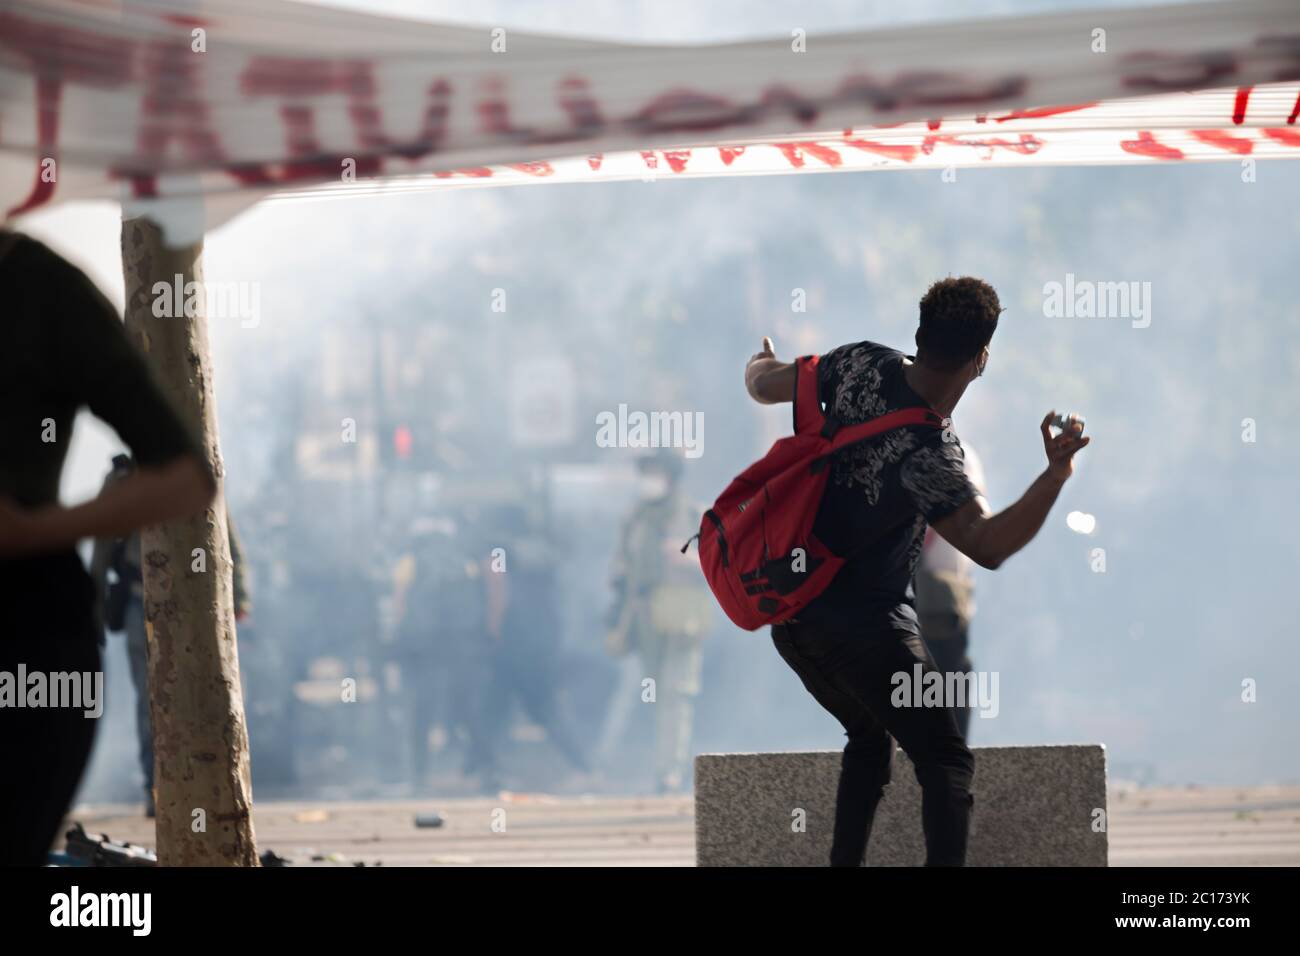 Paris, France. 13th June, 2020. A protester throws an object at police during a Black Lives Matter demonstration at Place de la Republique in Paris, France, on June 13th, 2020. (Photo by Daniel Brown/Sipa USA) Credit: Sipa USA/Alamy Live News Stock Photo